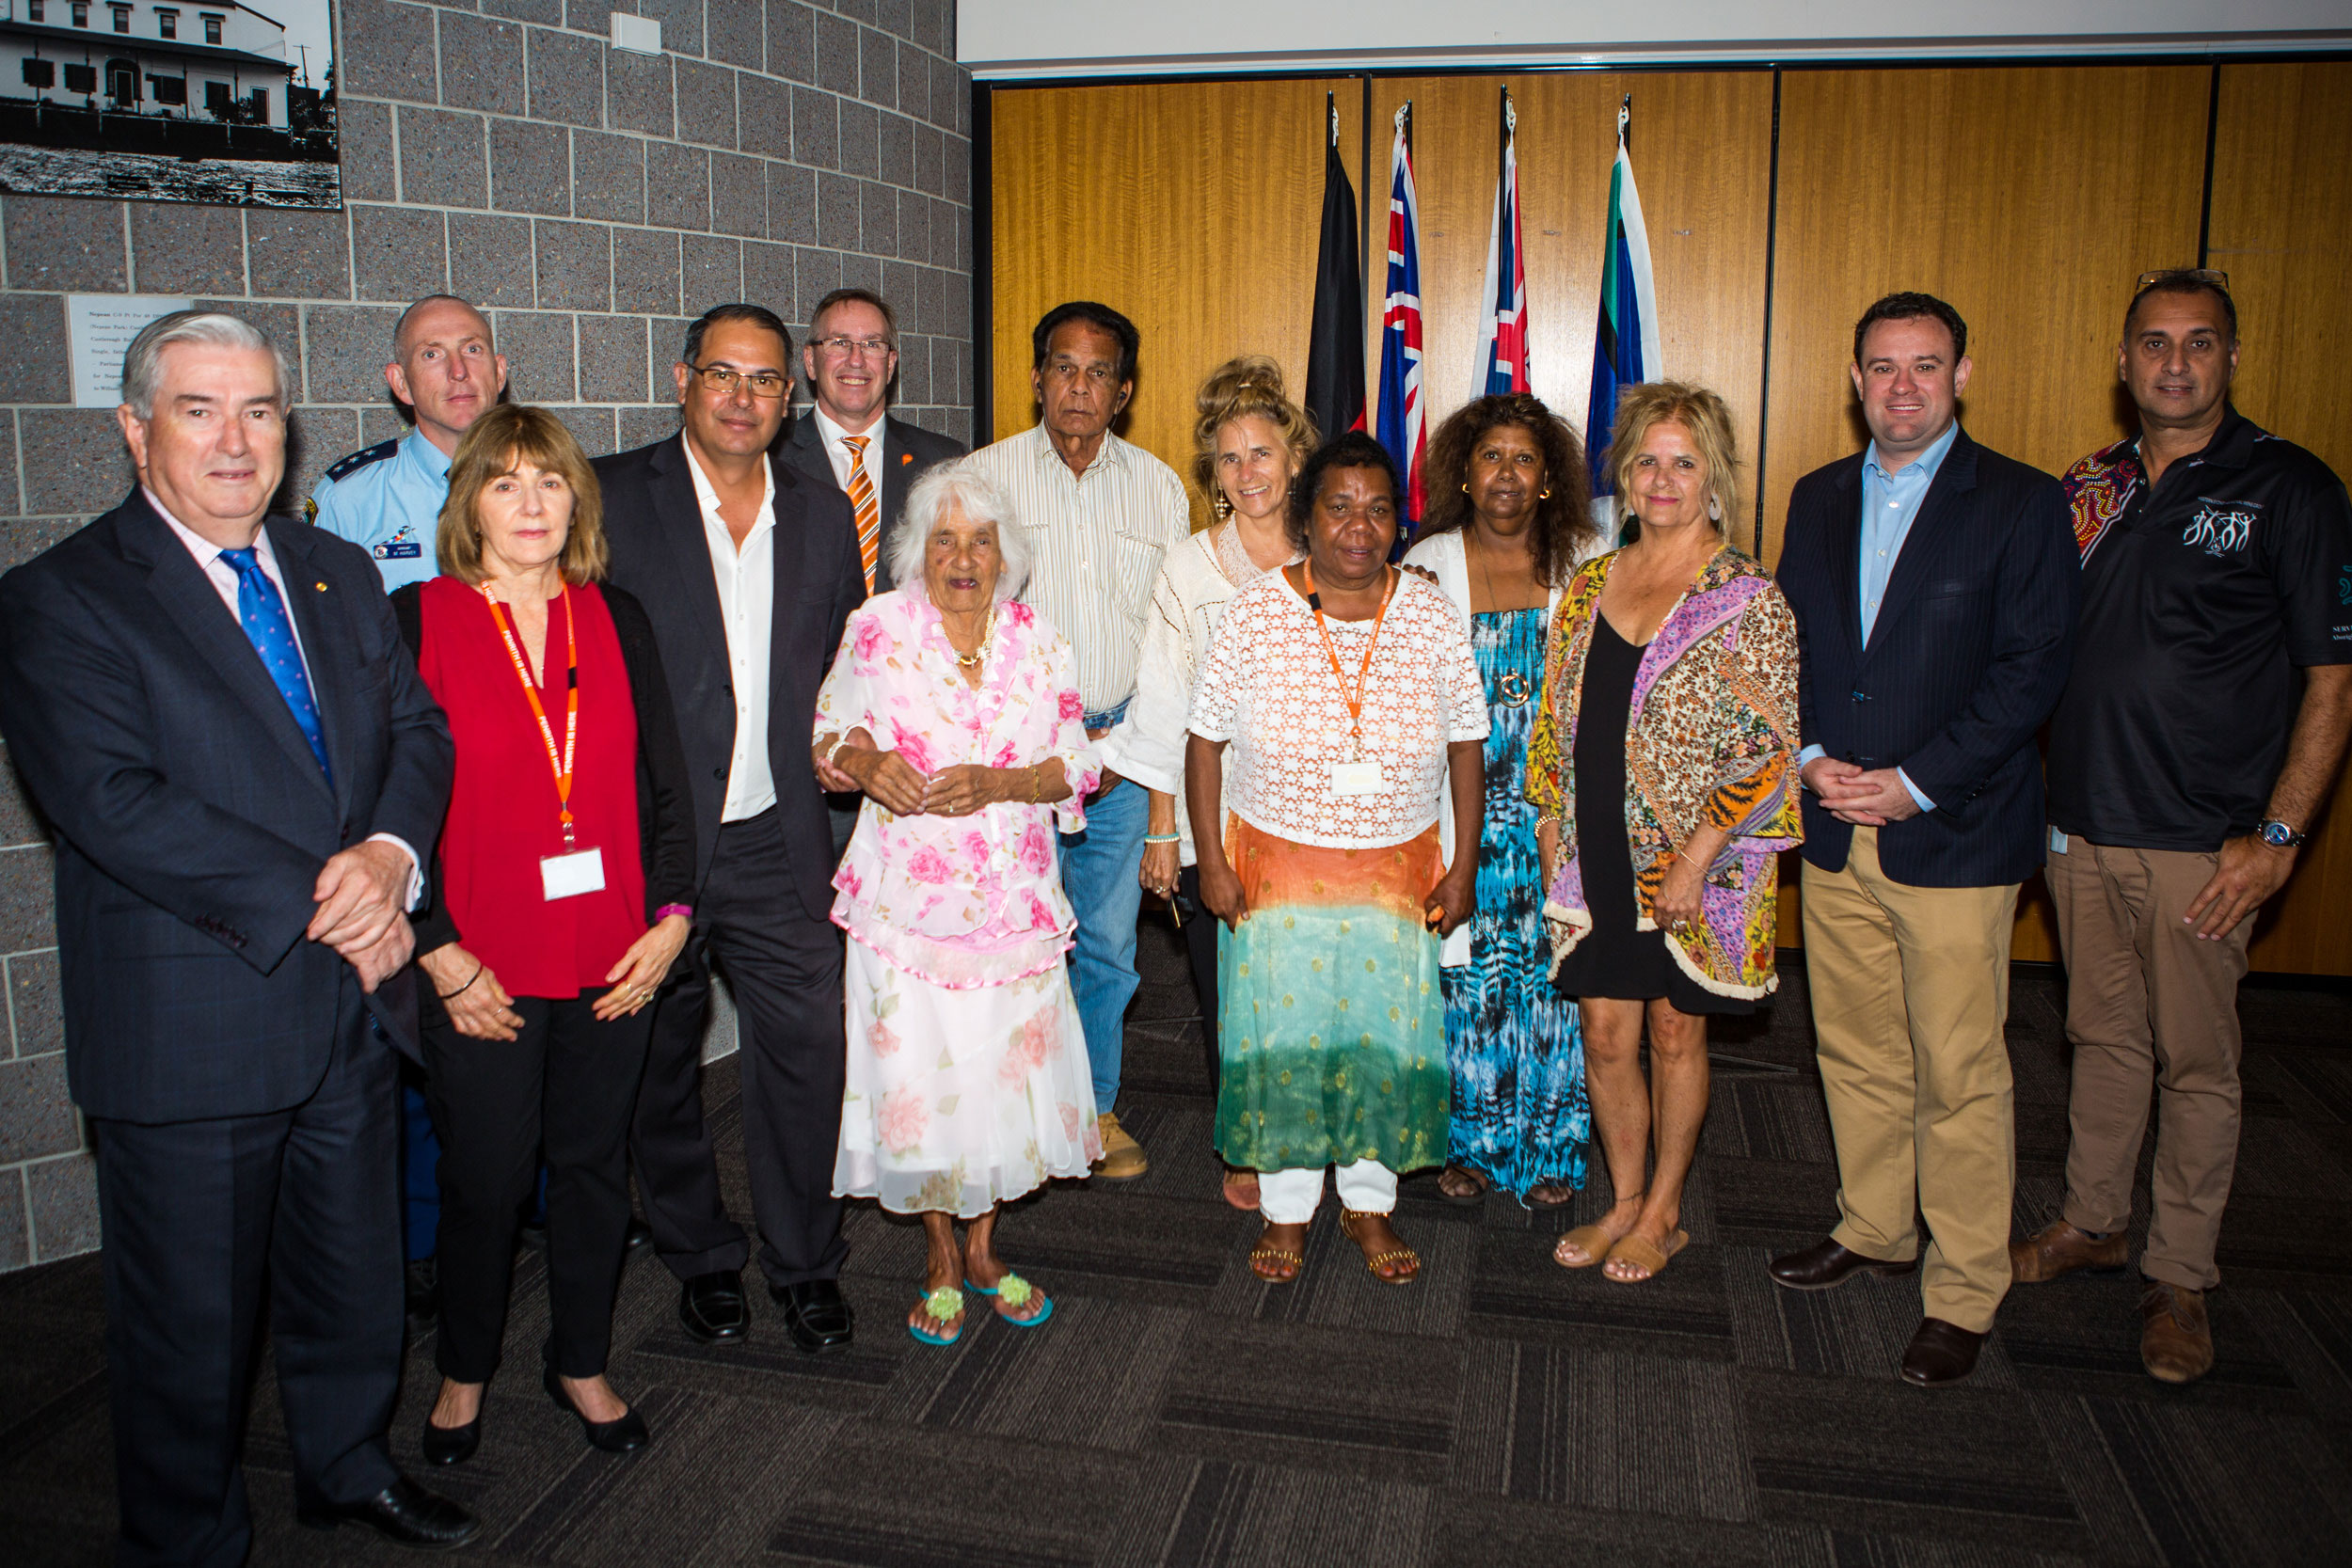 From left to right:(left to right): Penrith Mayor Ross Fowler OAM (front left) pictured with guest speaker and Link-Up CEO Terry Chenery (fourth from left), Aboriginal special guests and invited guests for Penrith Council's National Apology Day ceremony. Penrith Mayor Ross Fowler OAM (front left) pictured with guest speaker and Link-Up CEO Terry Chenery (fourth from left), Aboriginal special guests and invited guests for Penrith Council's National Apology Day ceremony.